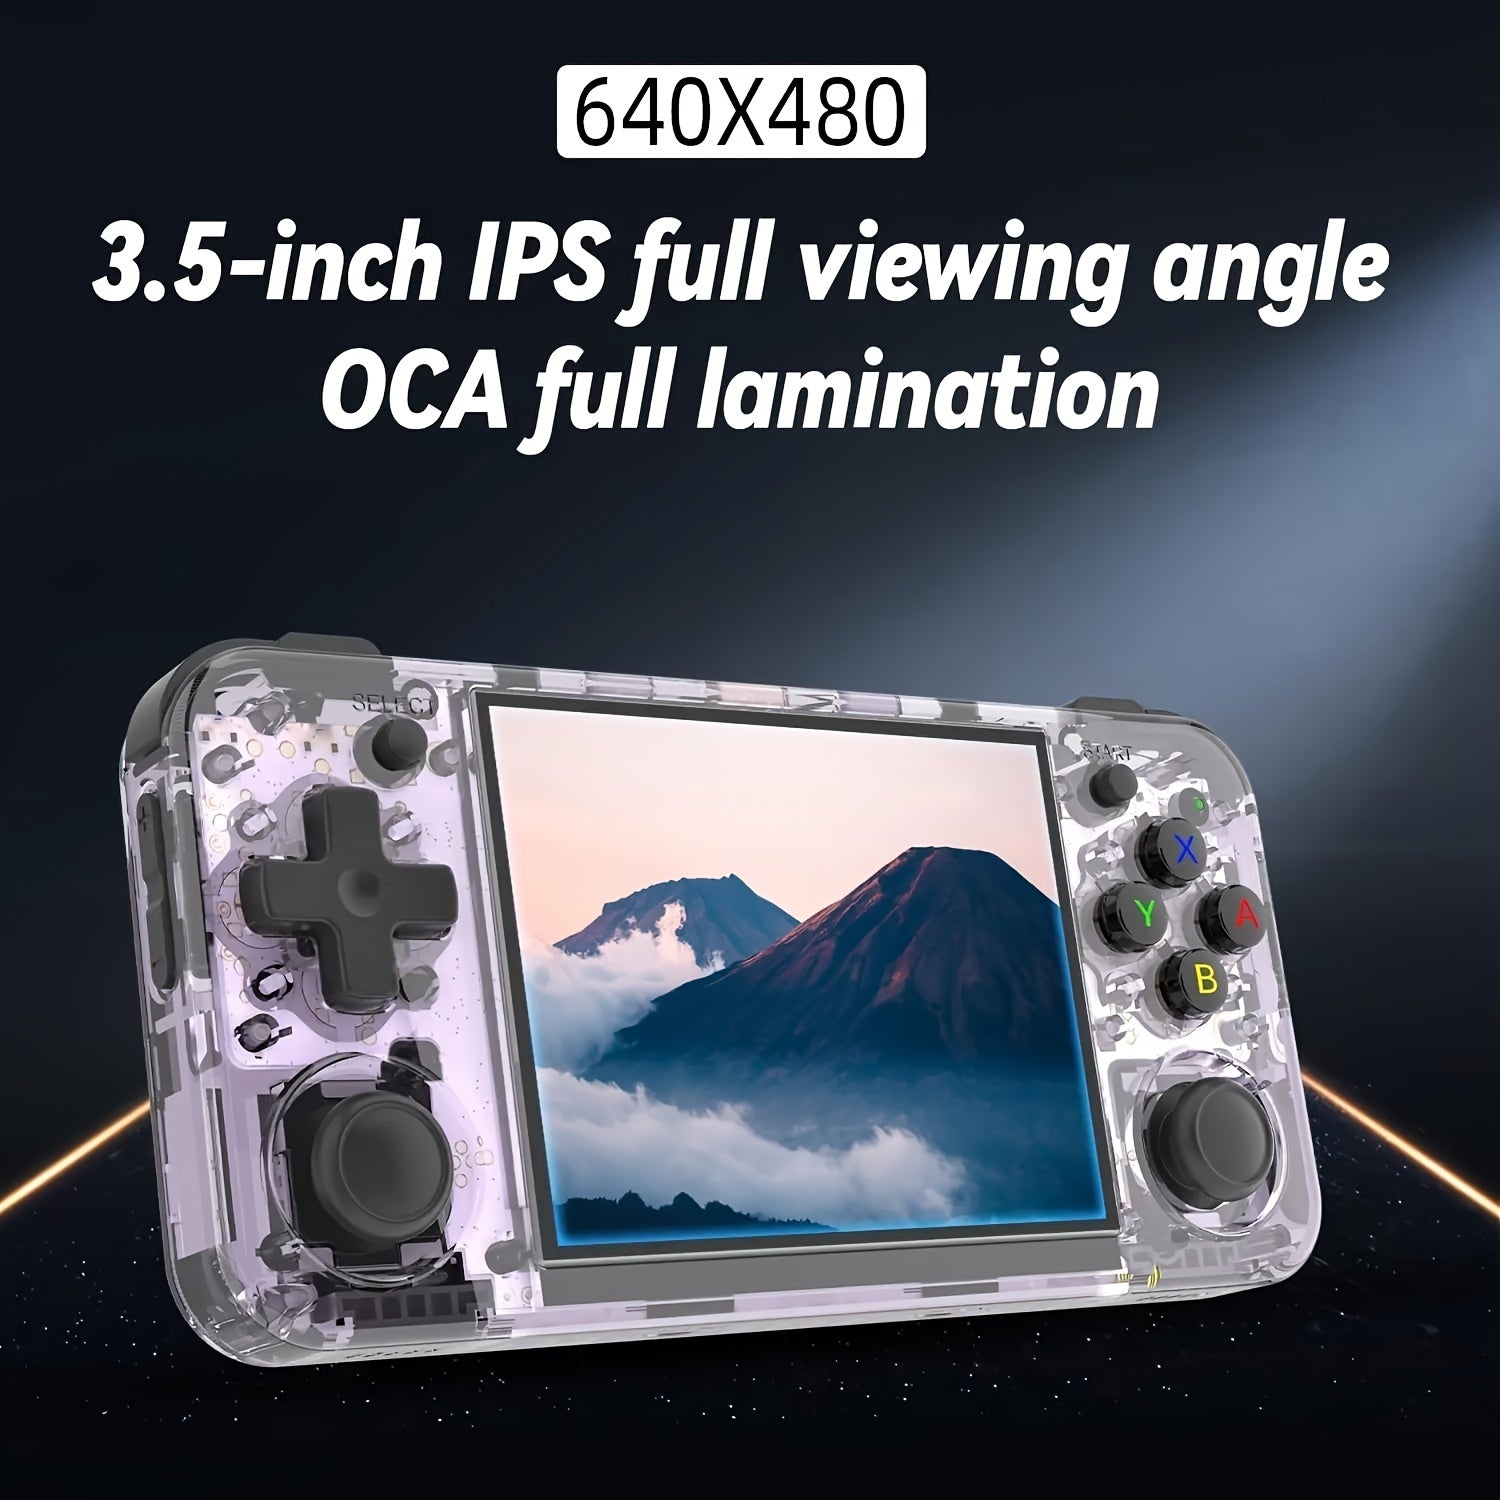 ANBERNIC Handheld Game Console, 3.5 Inch IPS Screen Linux System Support HD TV Output 5G WiFi B4.2, RG35XX H Linux System 3300MAH High Capacity Battery, 1.5GHz Frequency - Rexpect Nerd